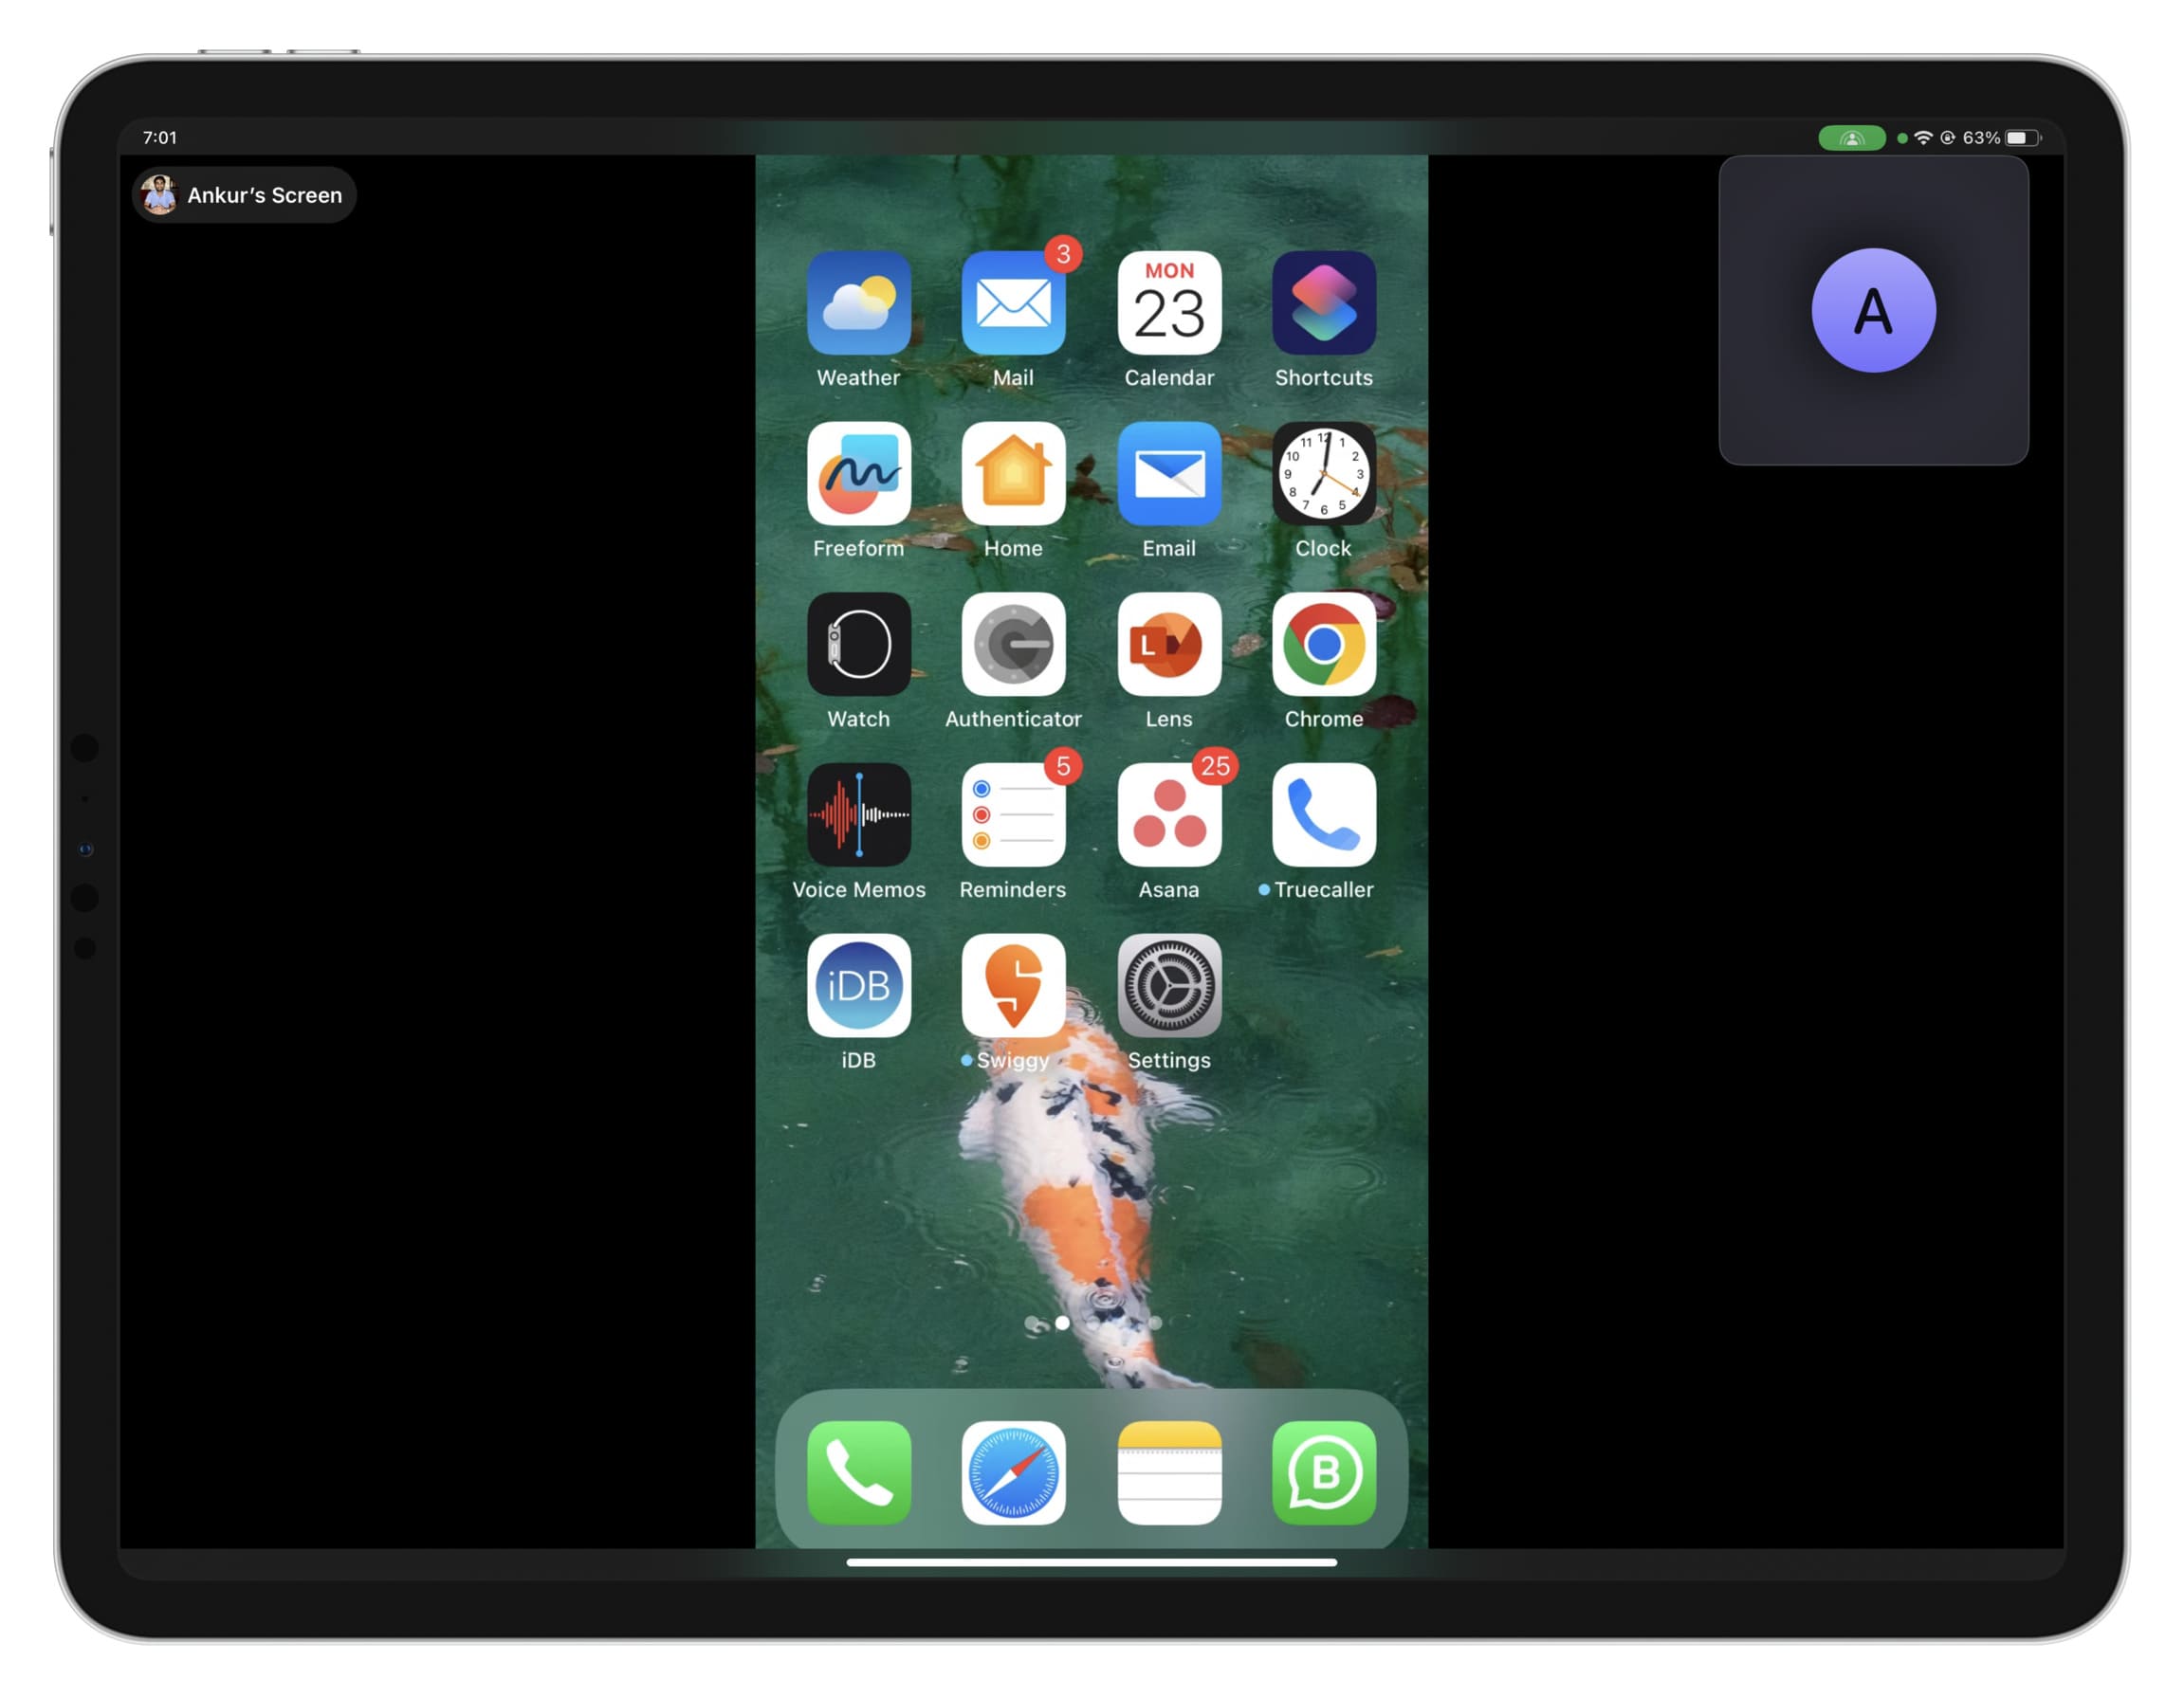 iPhone screen shared via FaceTime to an iPad